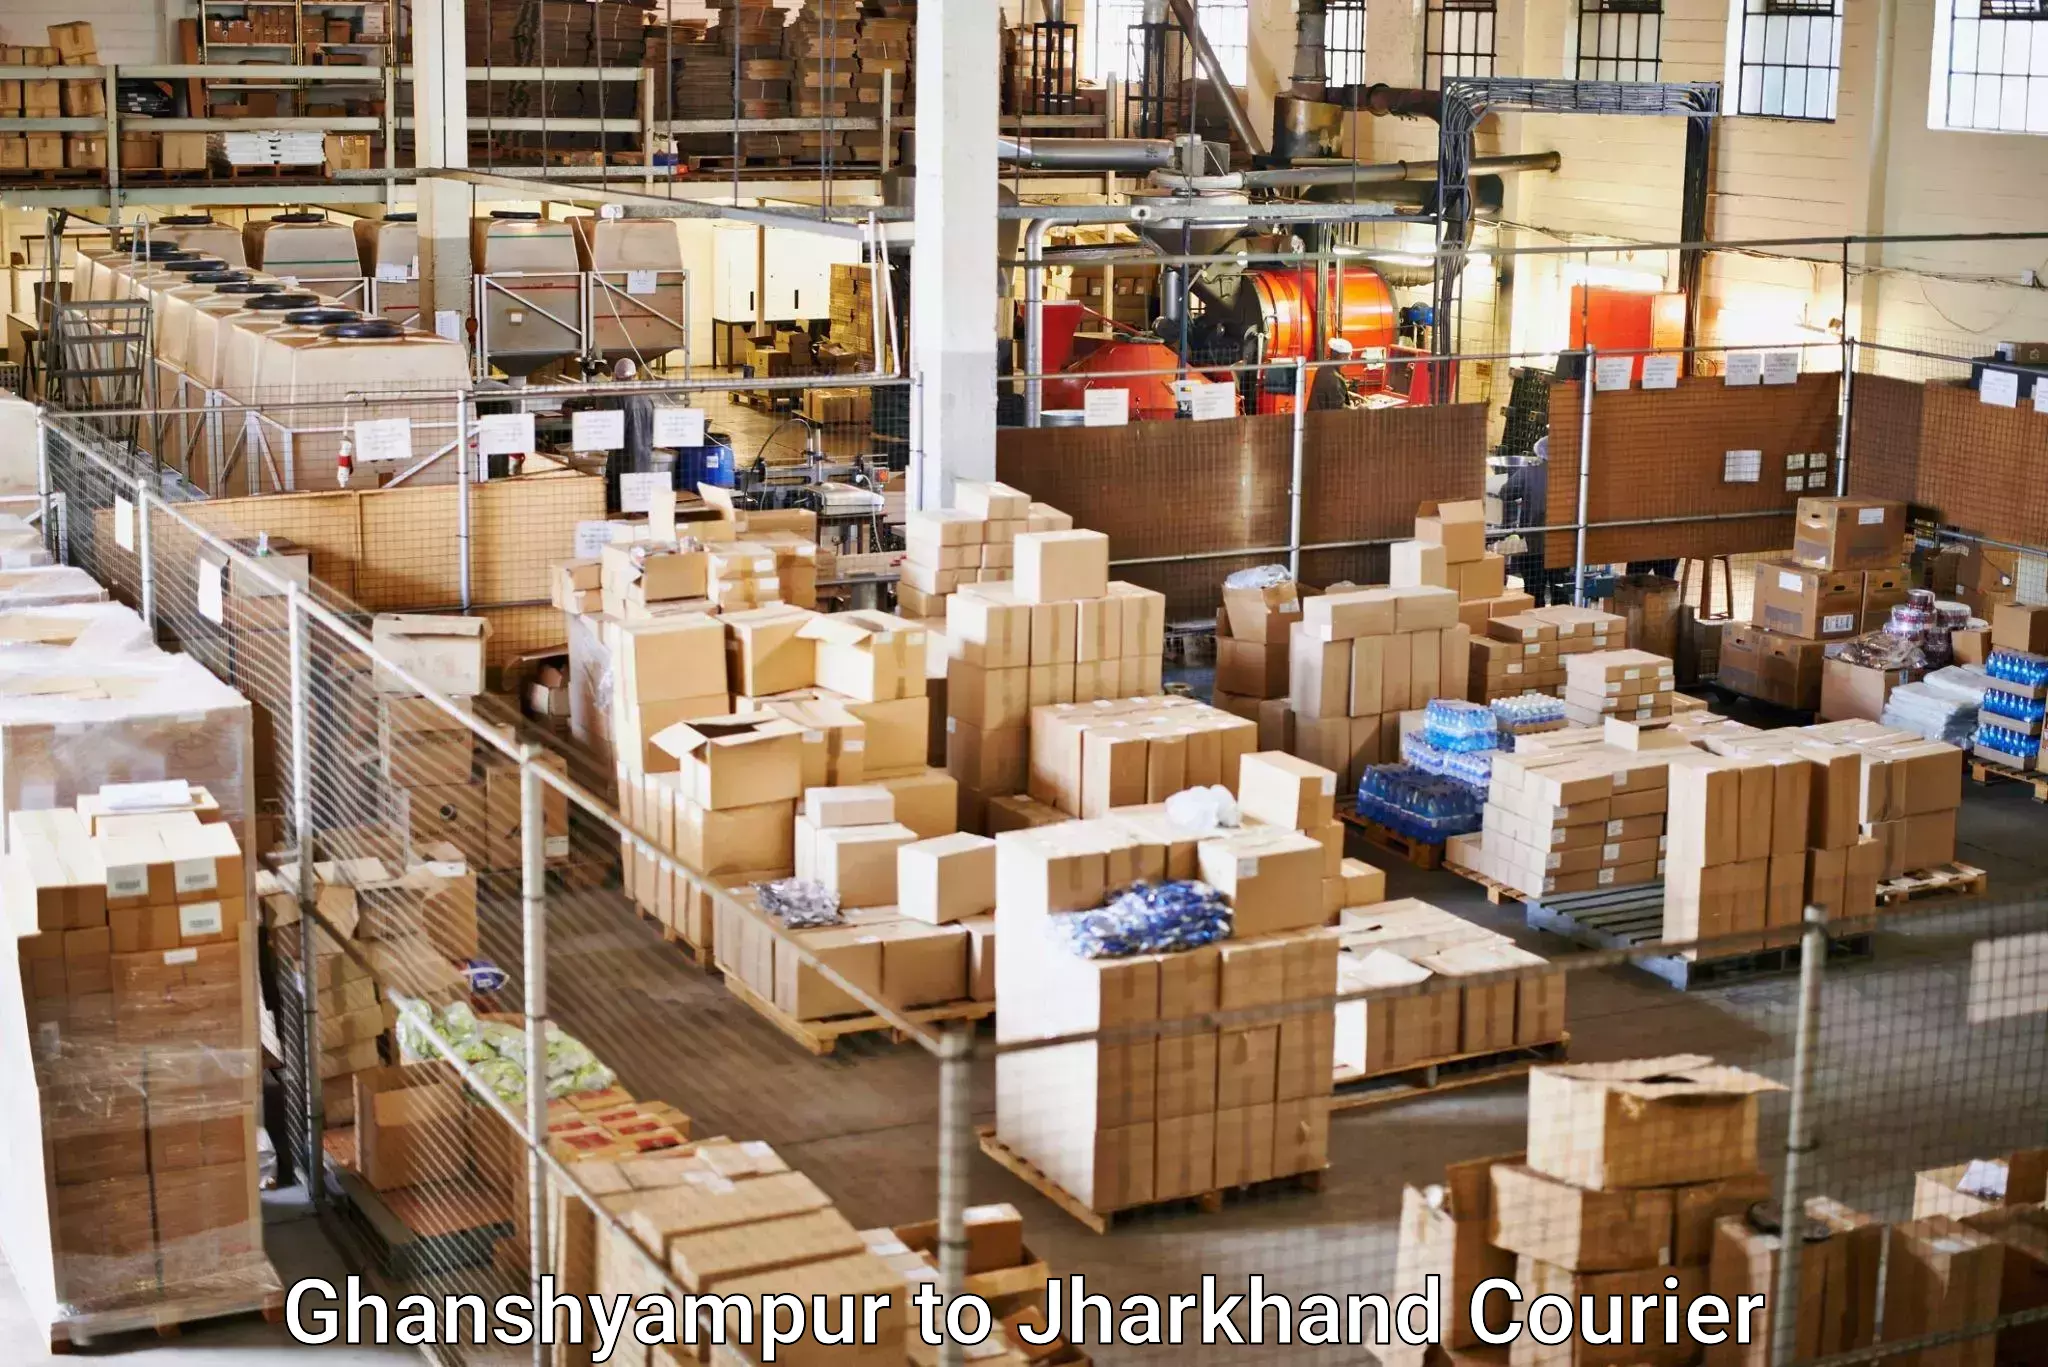 Expedited shipping solutions Ghanshyampur to Dhanbad